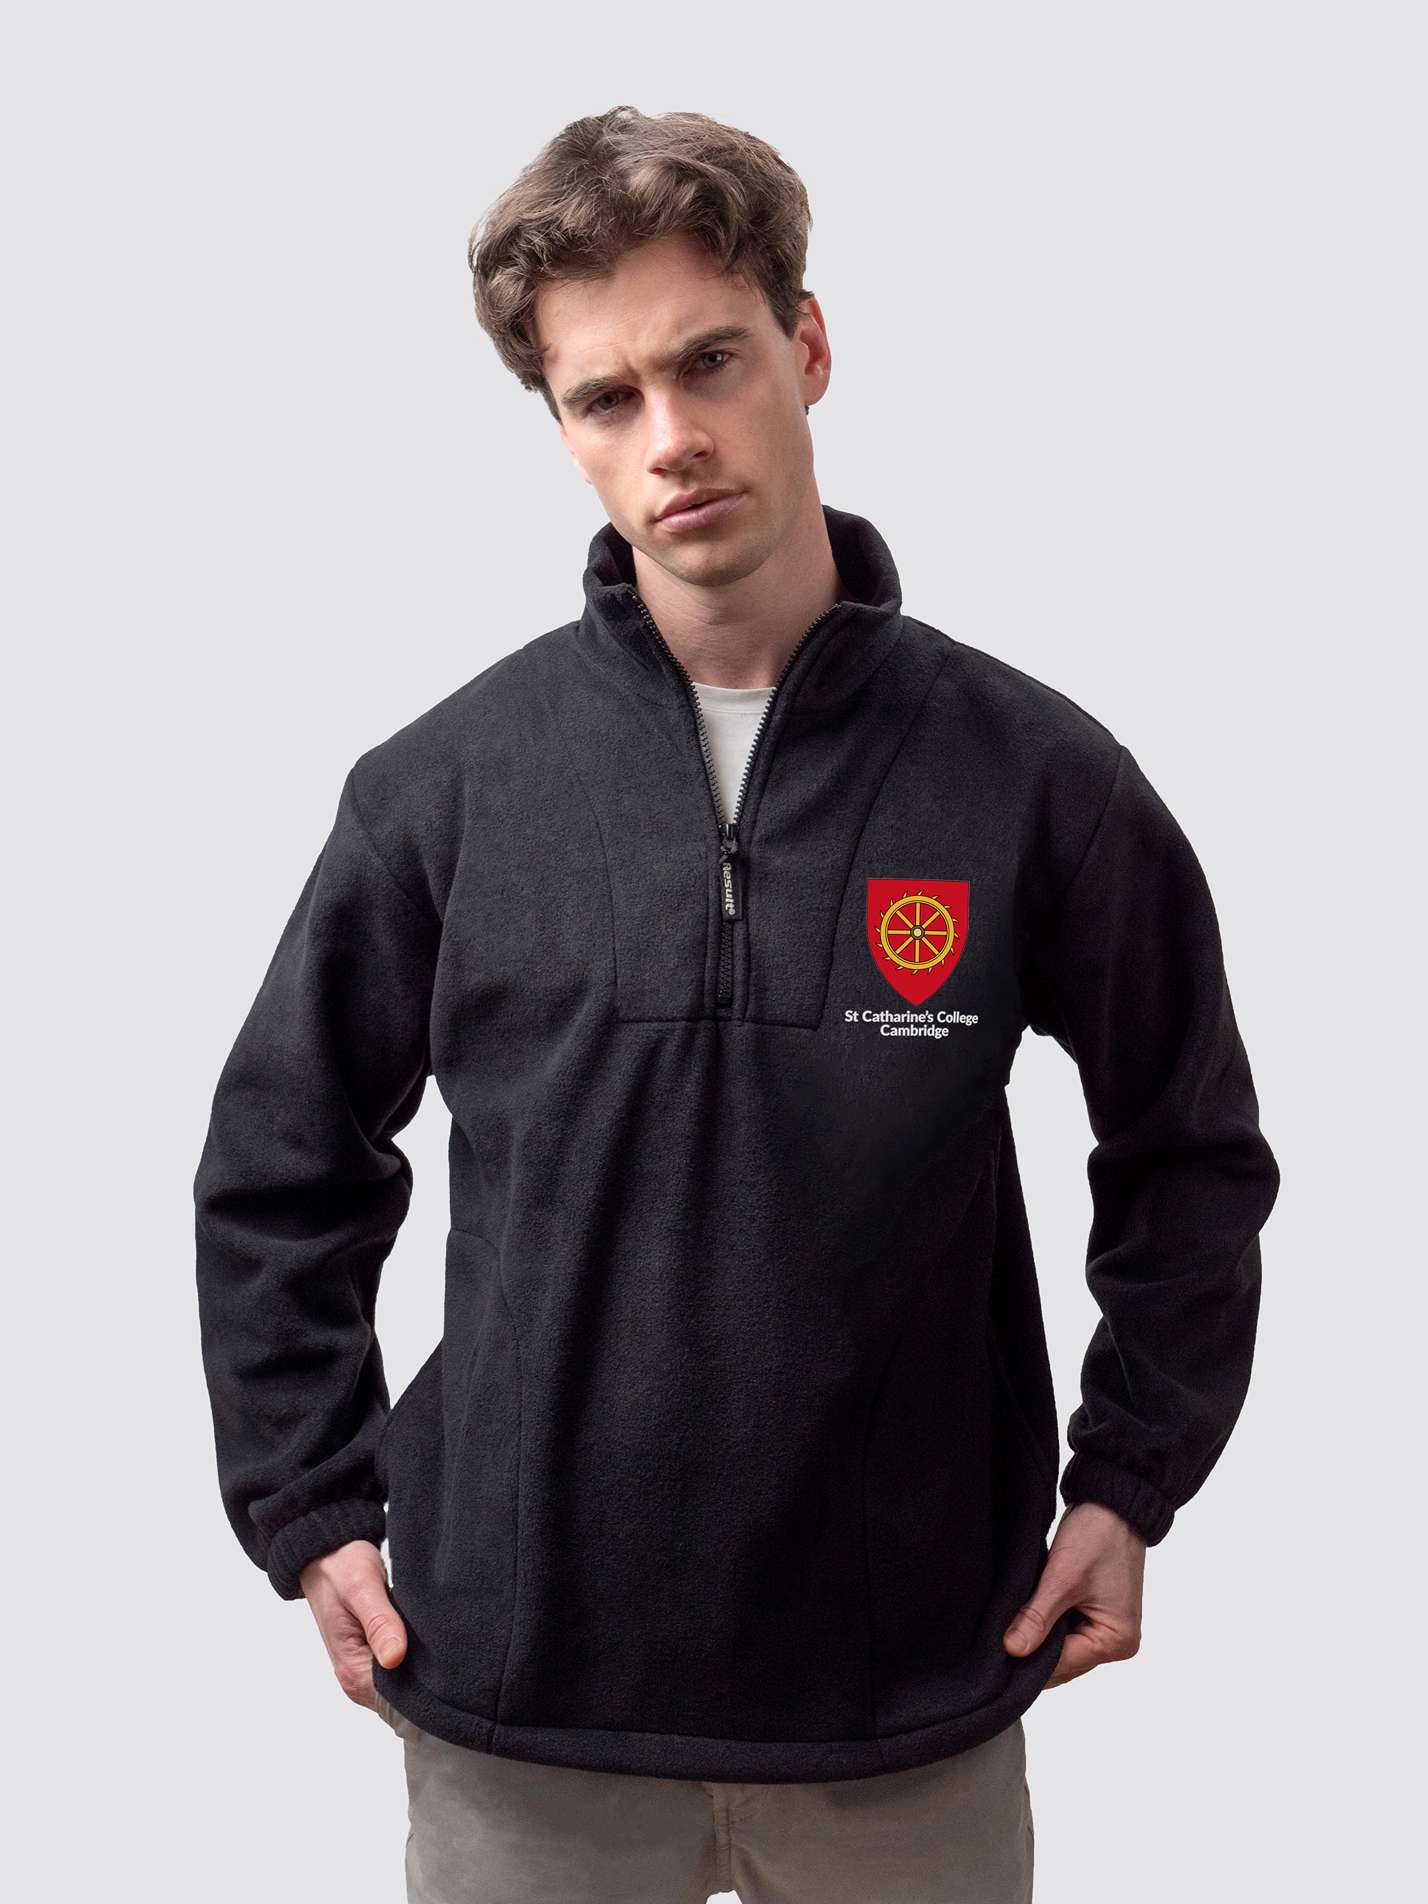 Cambridge University fleece, with custom embroidered initials and St Catharine's crest